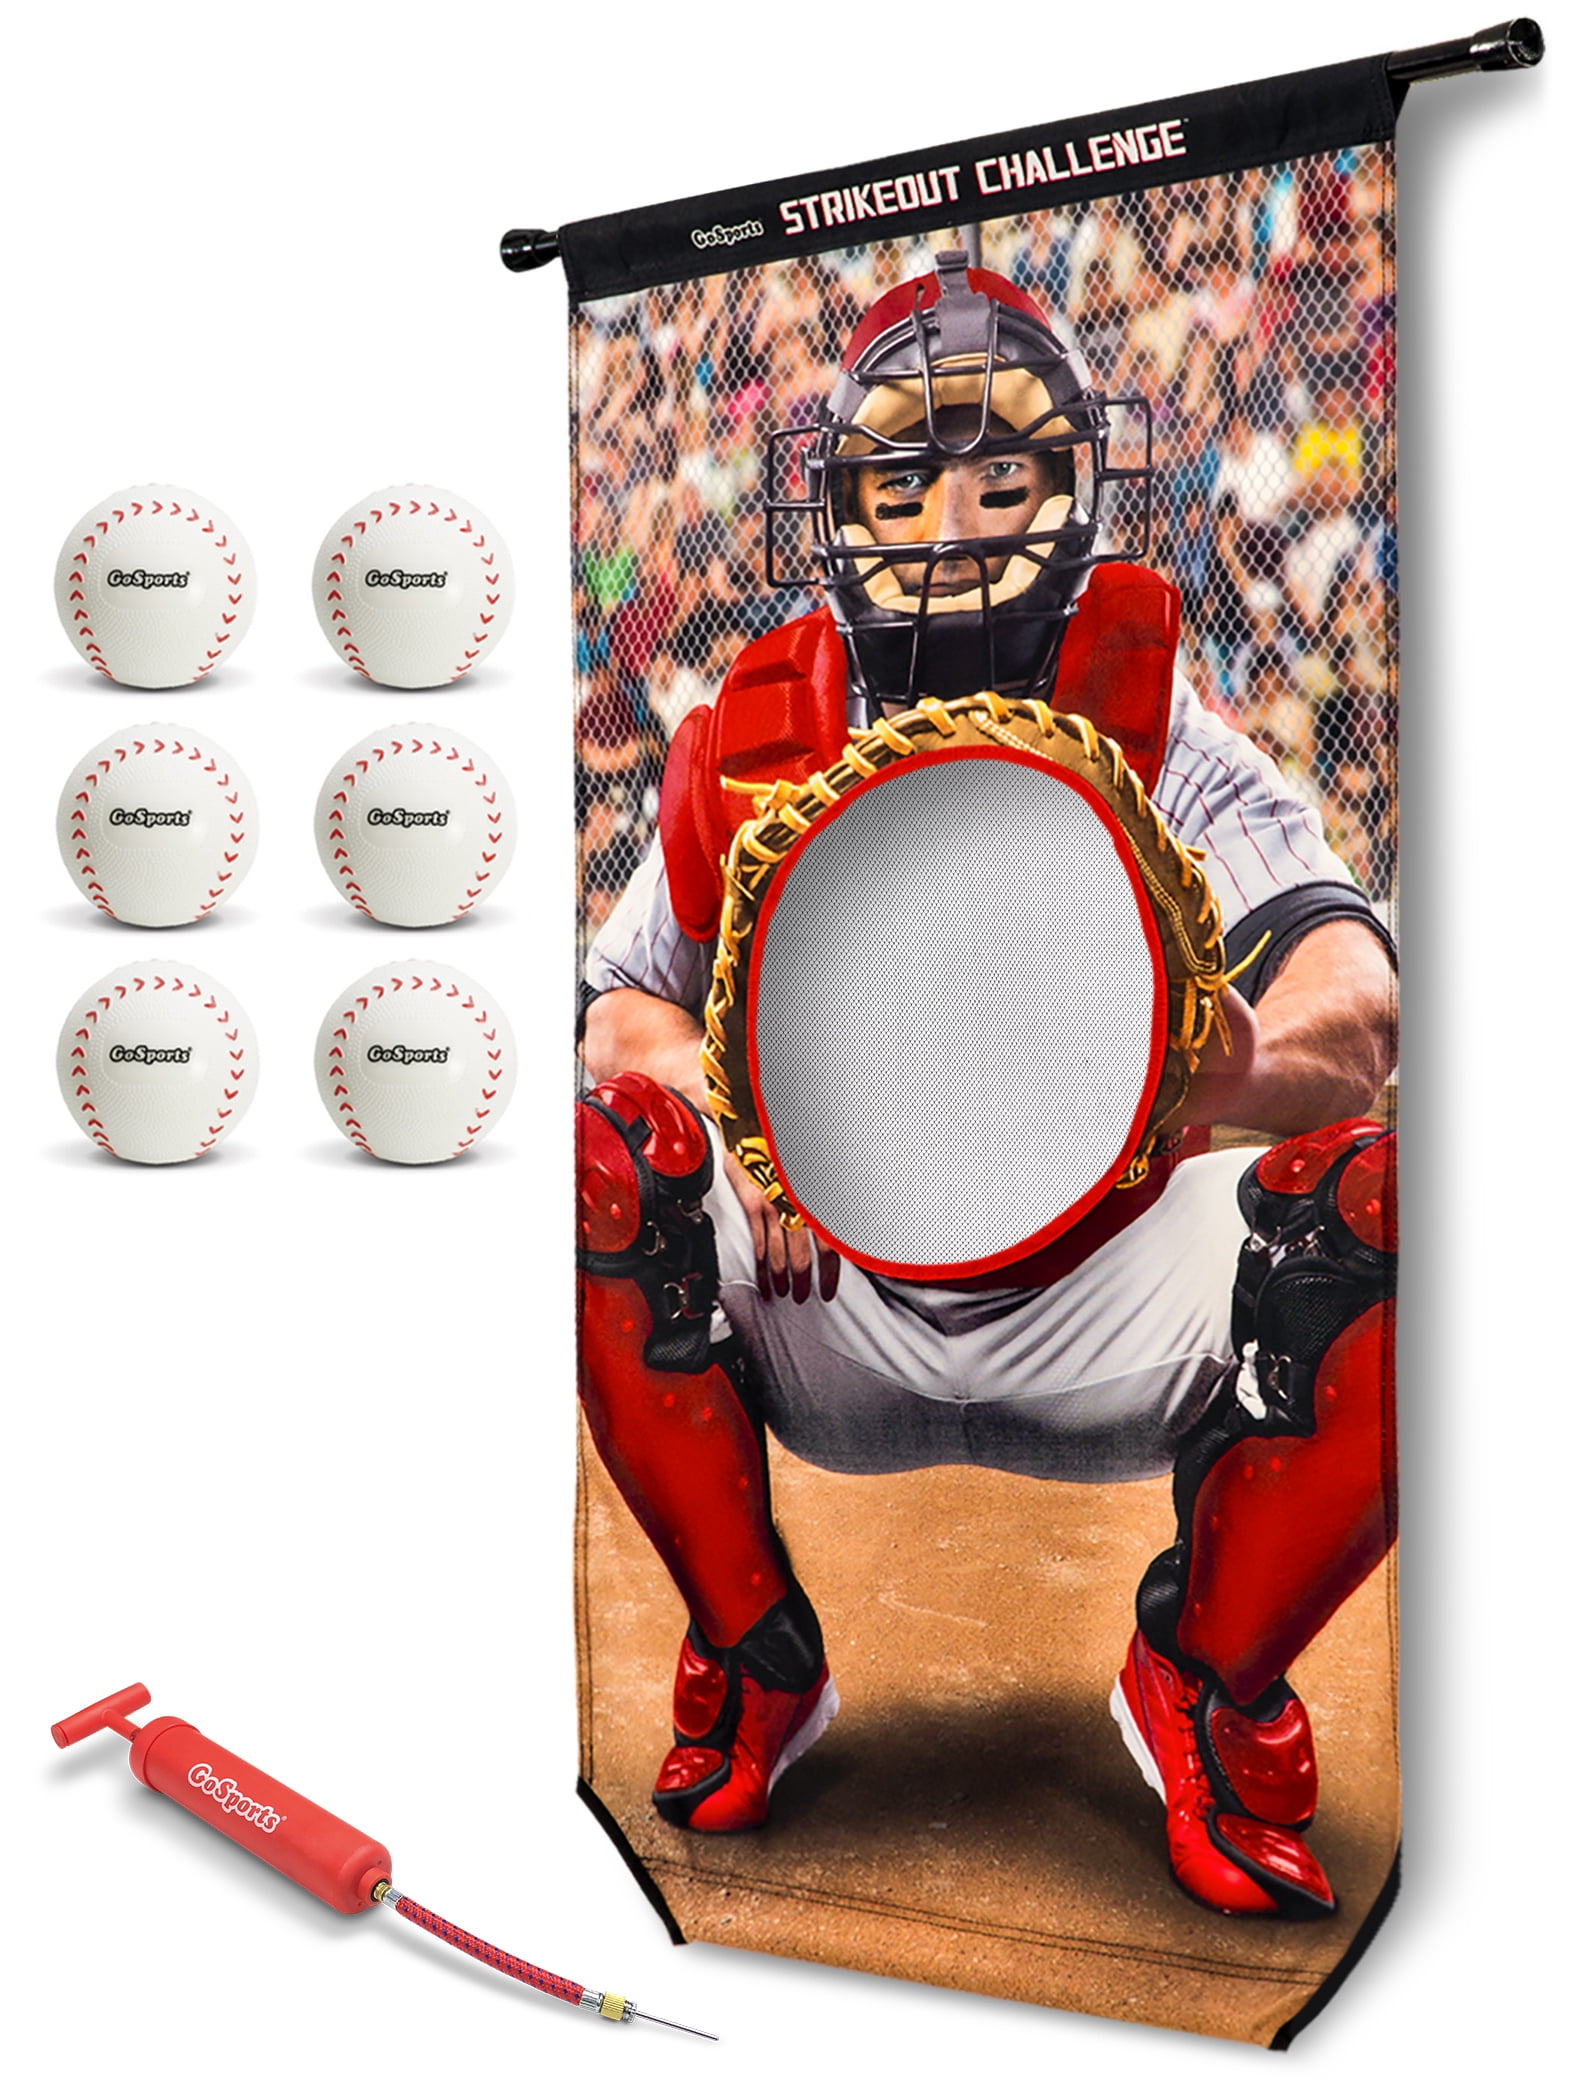 GoSports Strikeout Challenge Baseball Toss Doorway Game, Includes Universal Door Frame Tension Rod and Inflatable Baseballs with Ball Pump